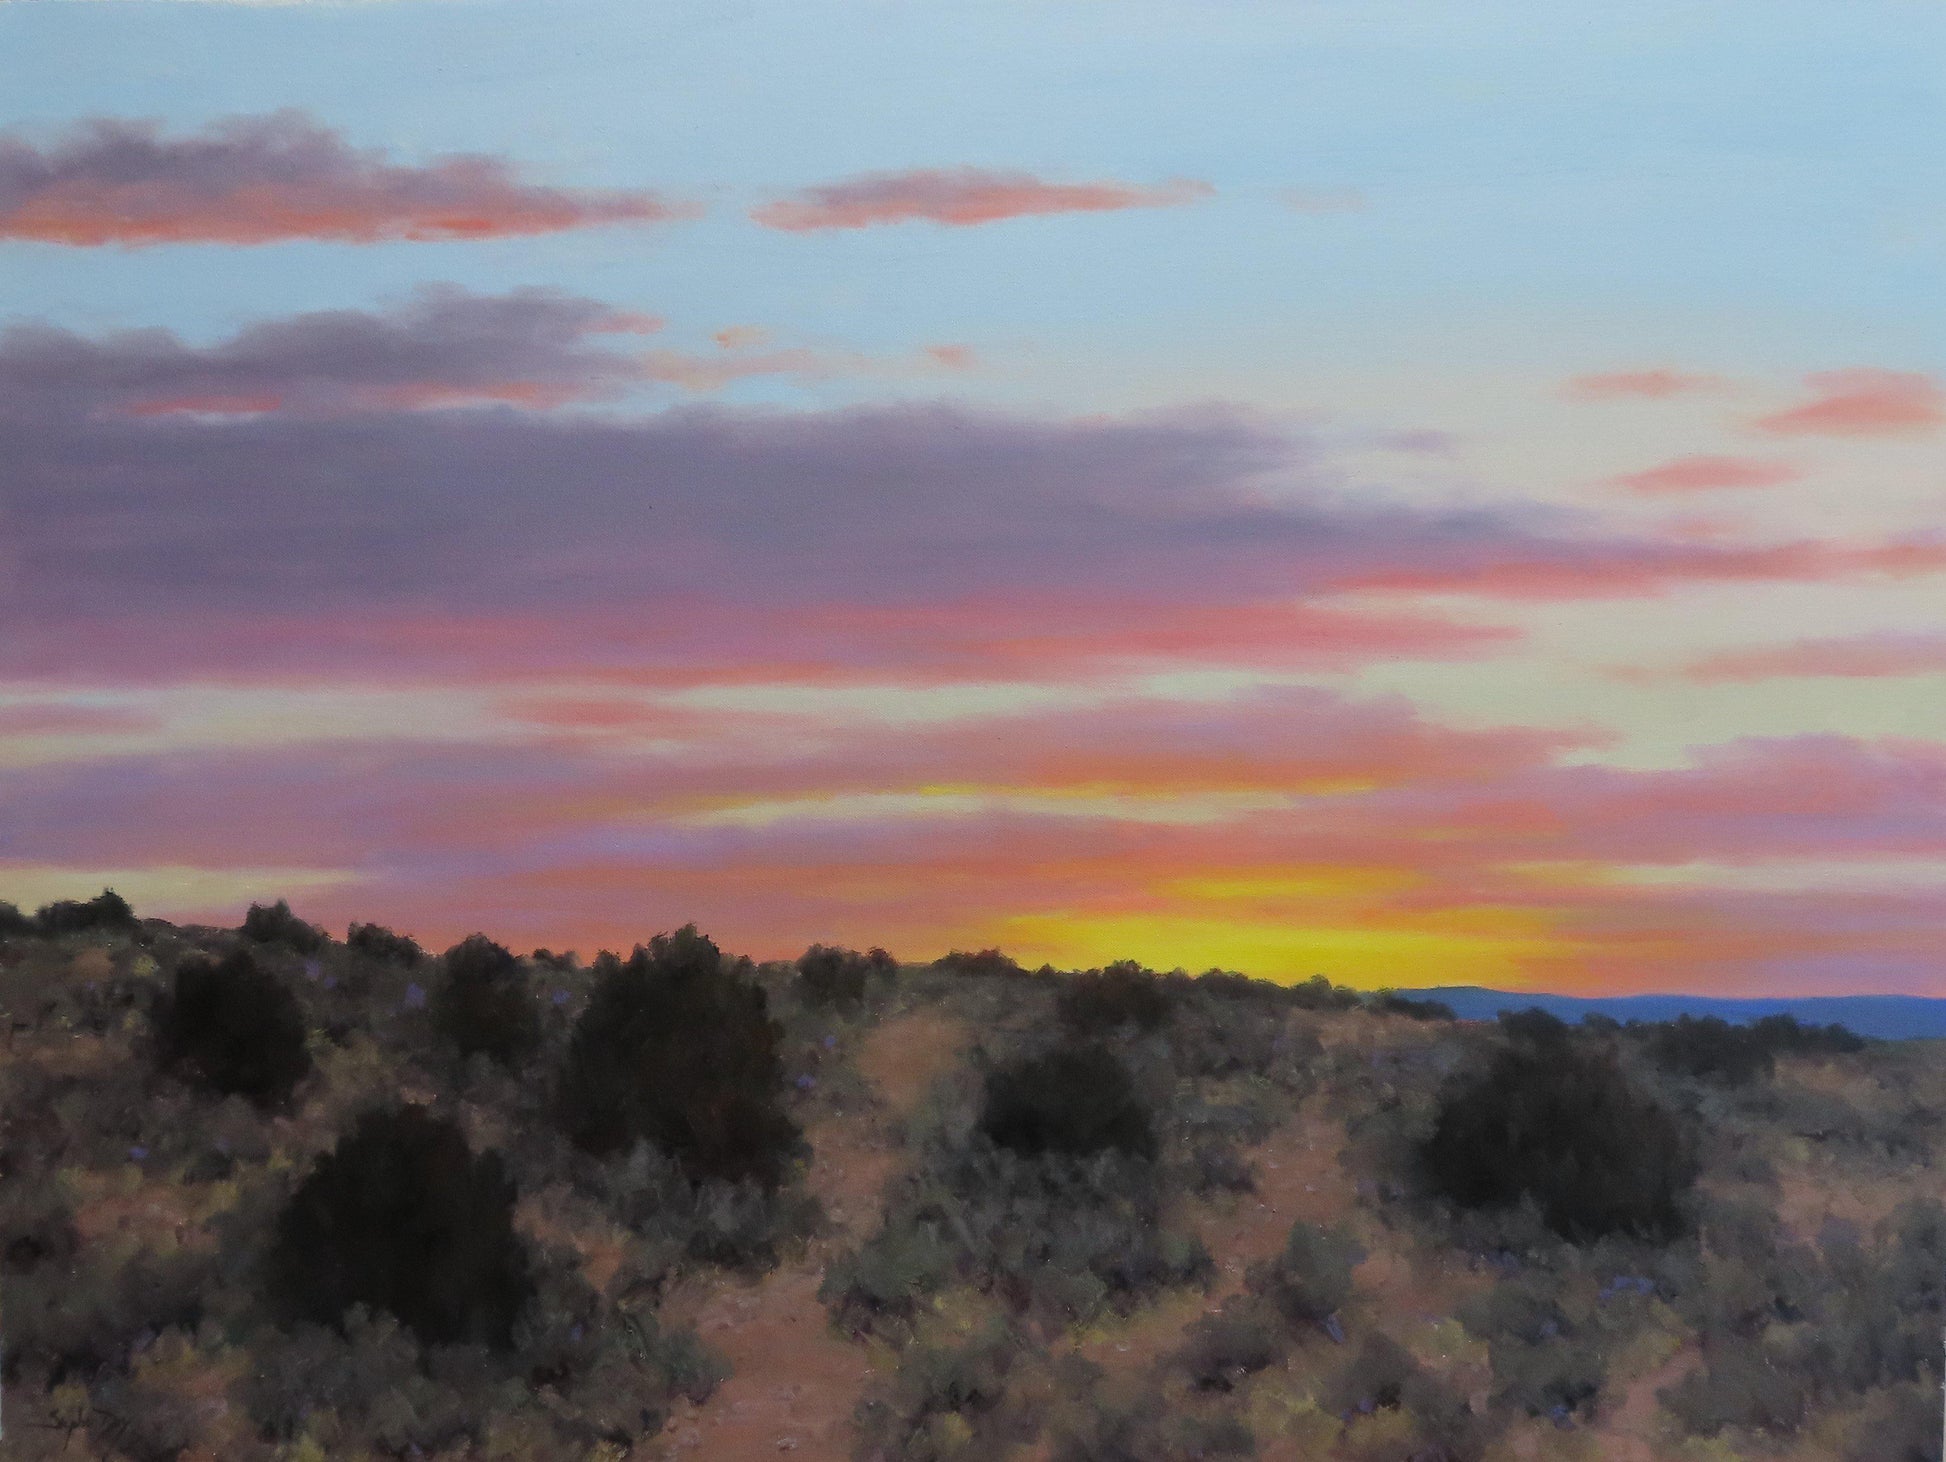 The Beauty of a New Mexico Evening-Painting-Stephen Day-Sorrel Sky Gallery